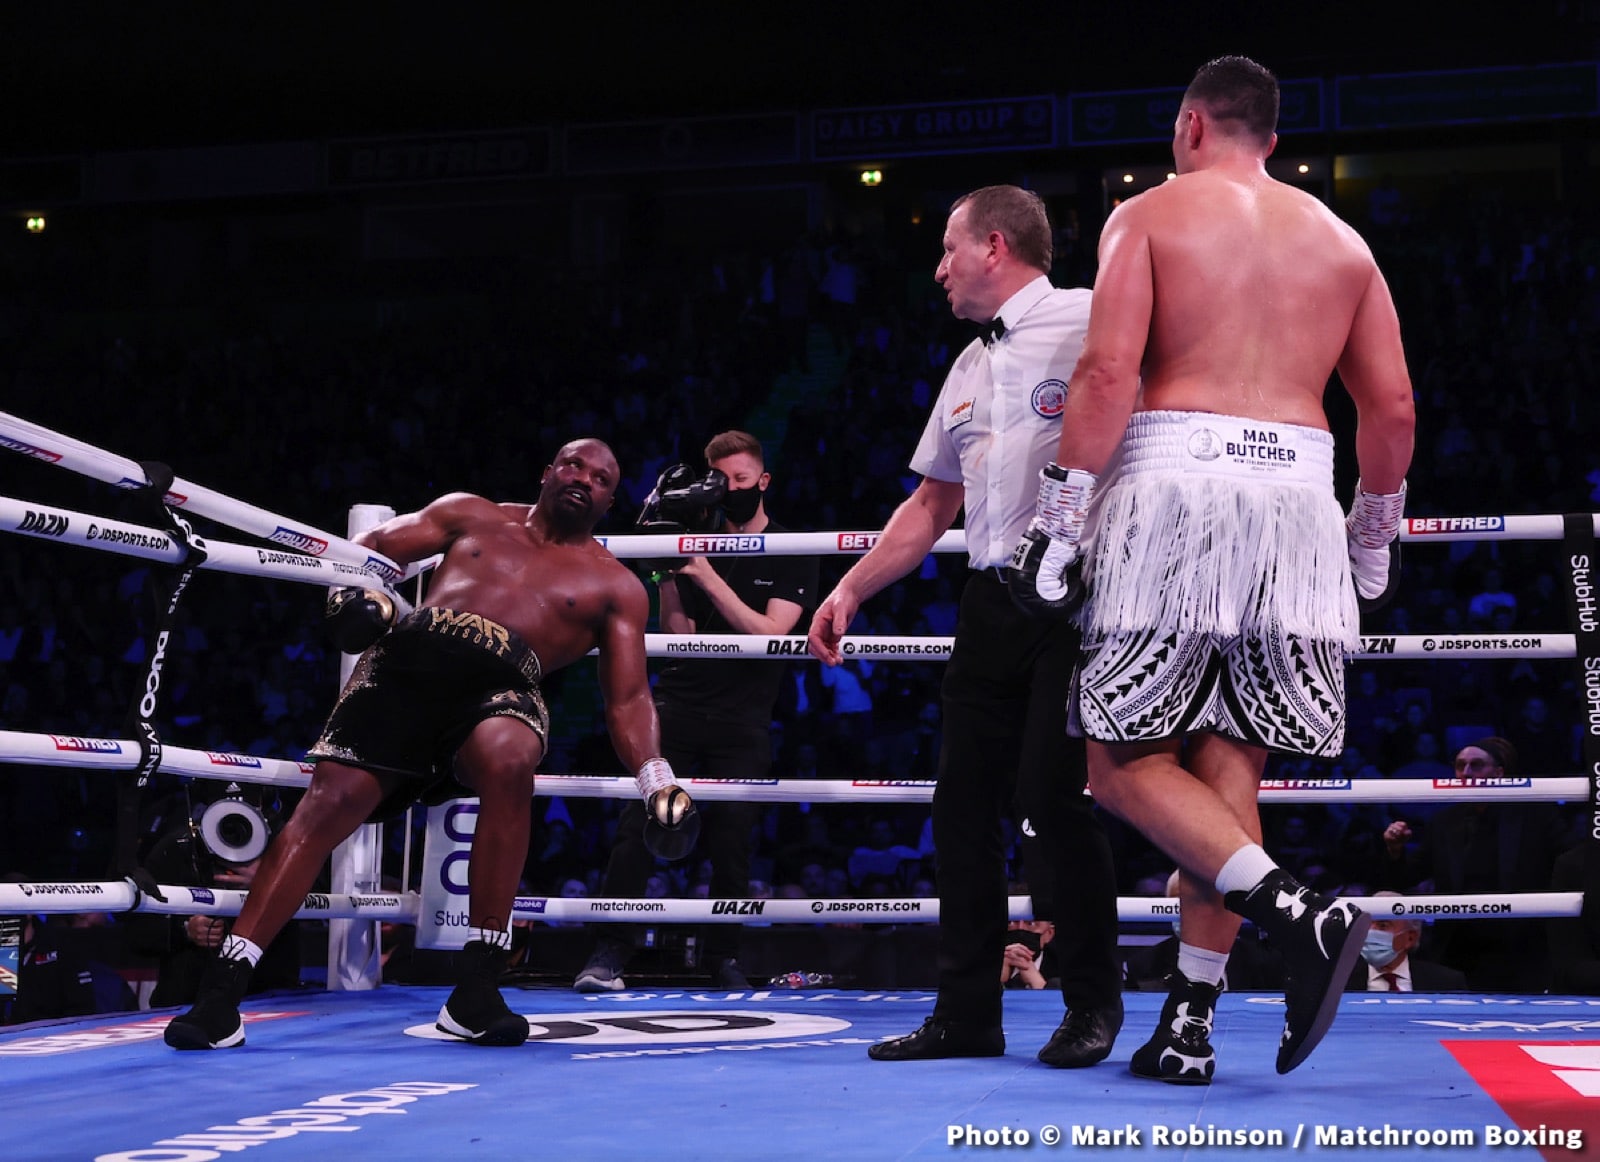 Image: Eddie Hearn says Chisora BEATS Deontay Wilder if it goes past 4 rounds